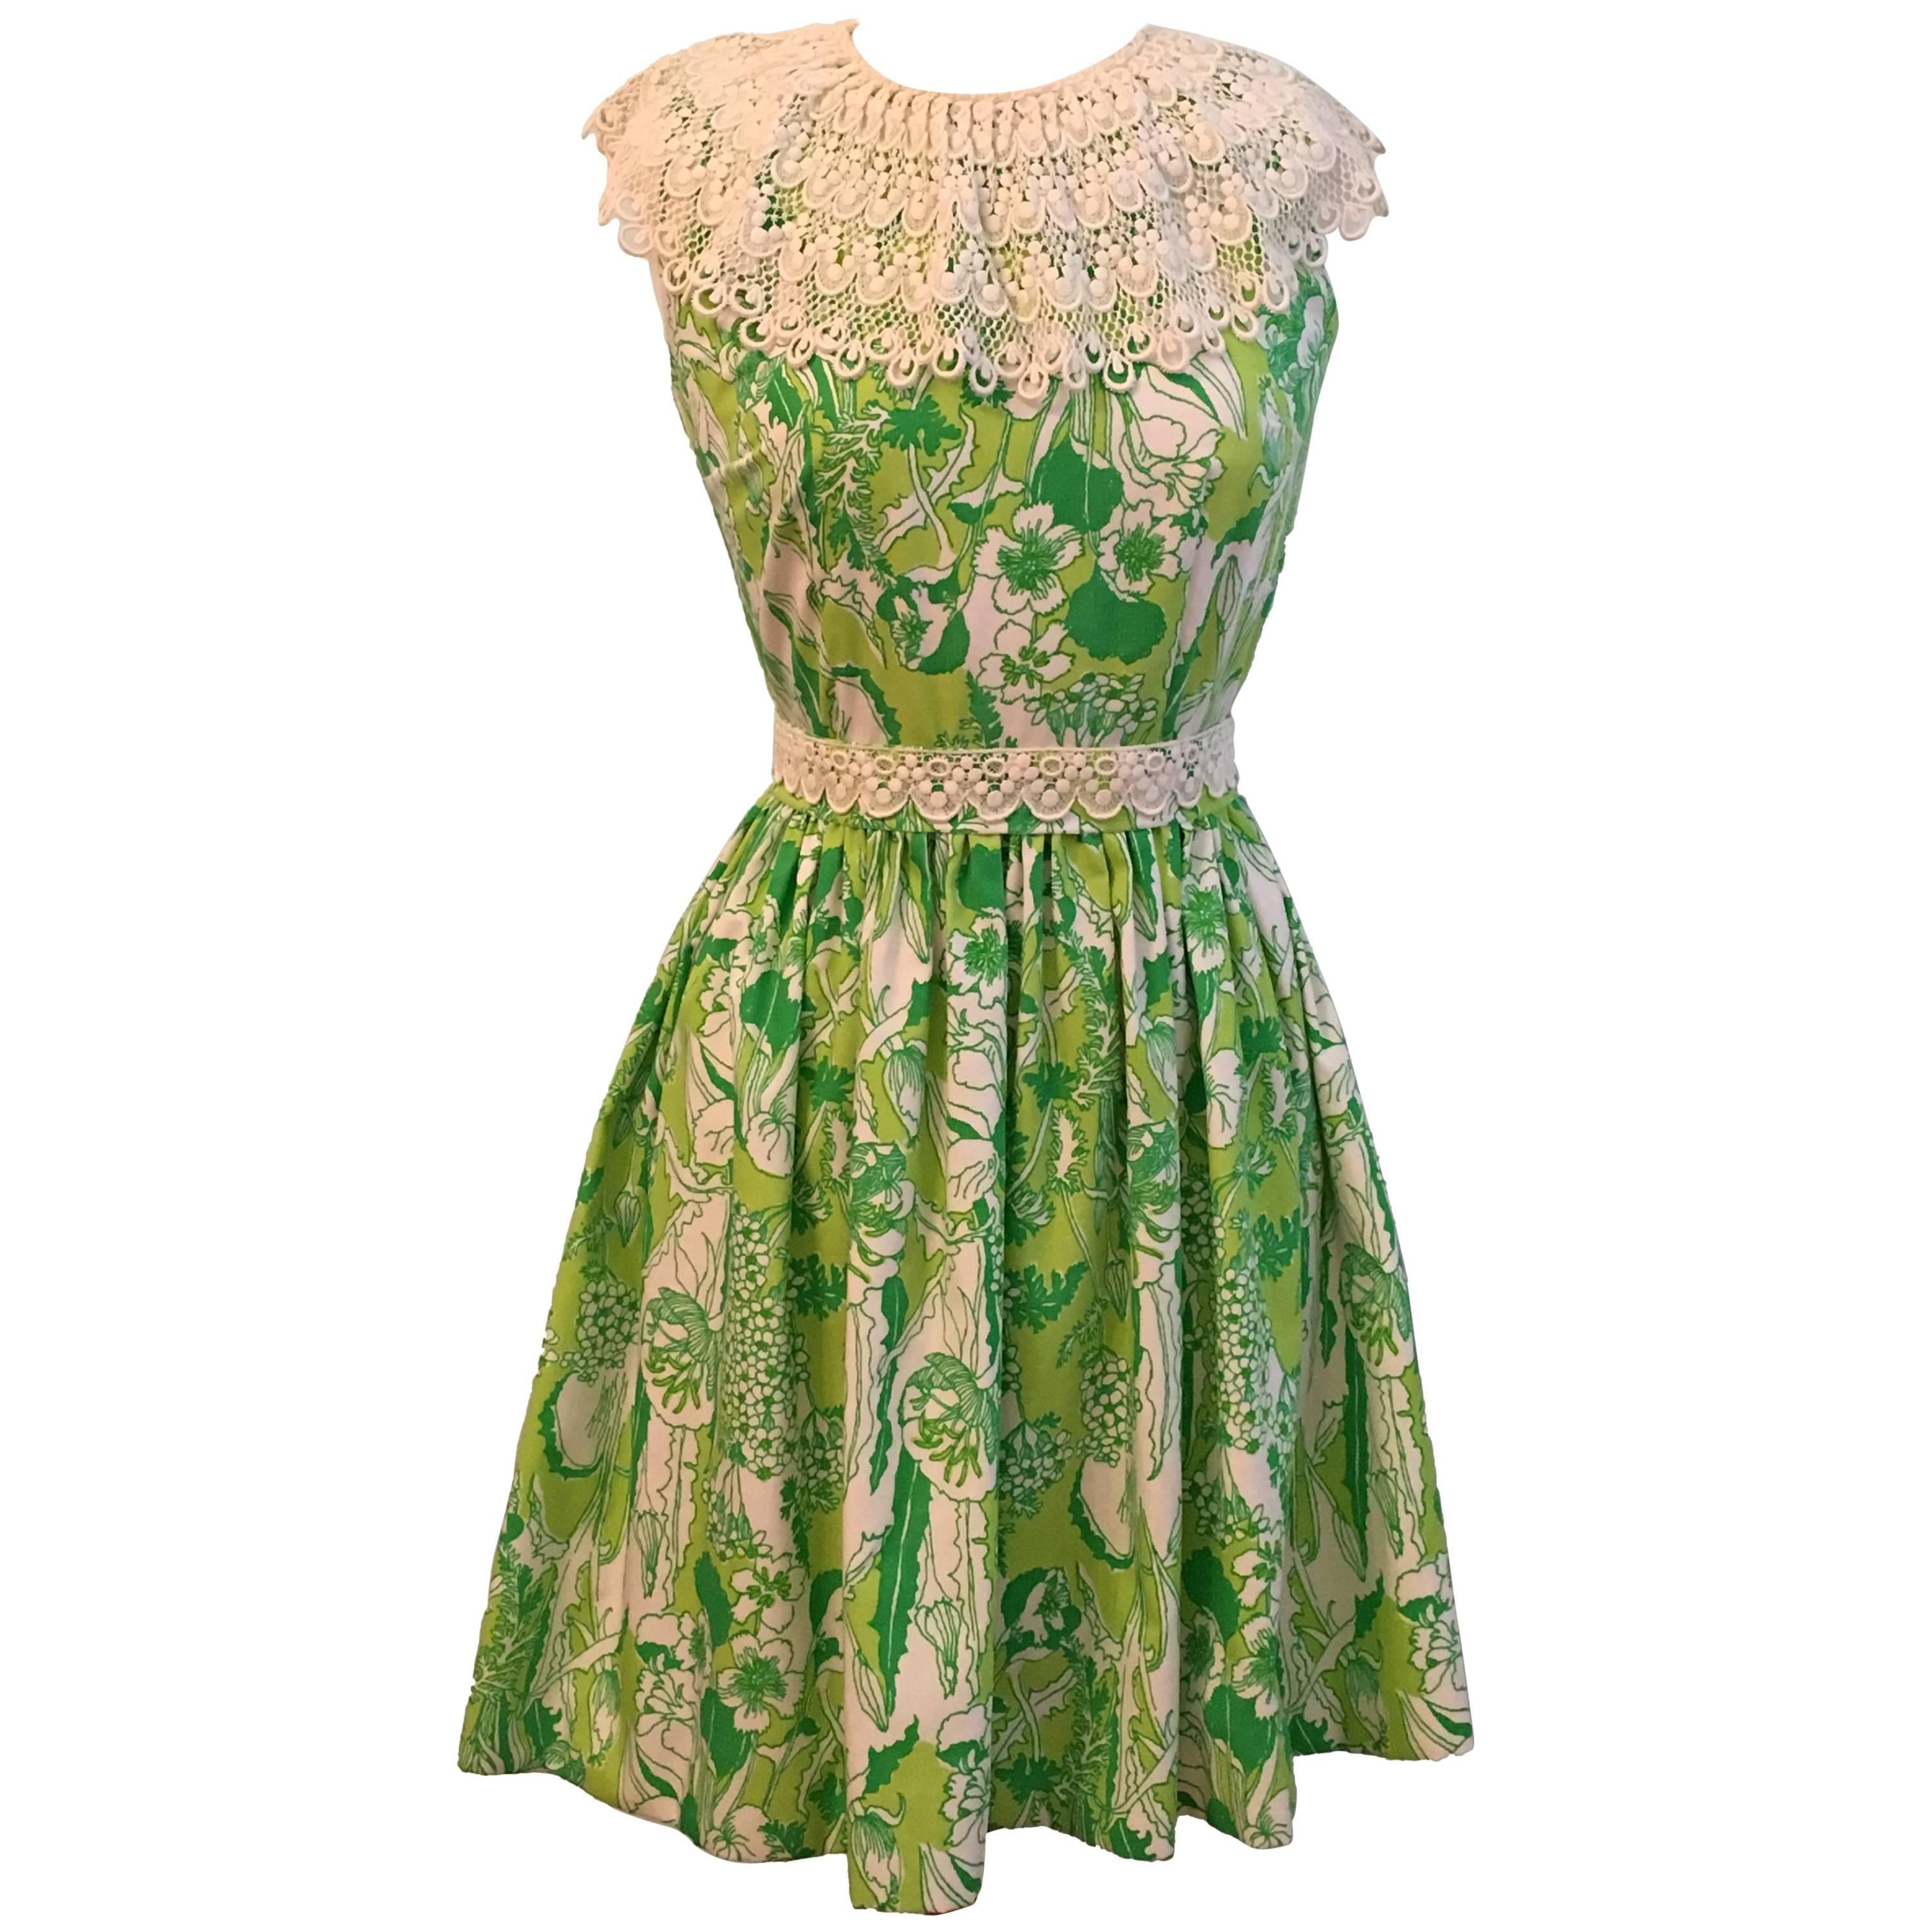 Rare 1960s Lilly Pulitzer Dress Green Floral Print with Huge Lace Collar For Sale